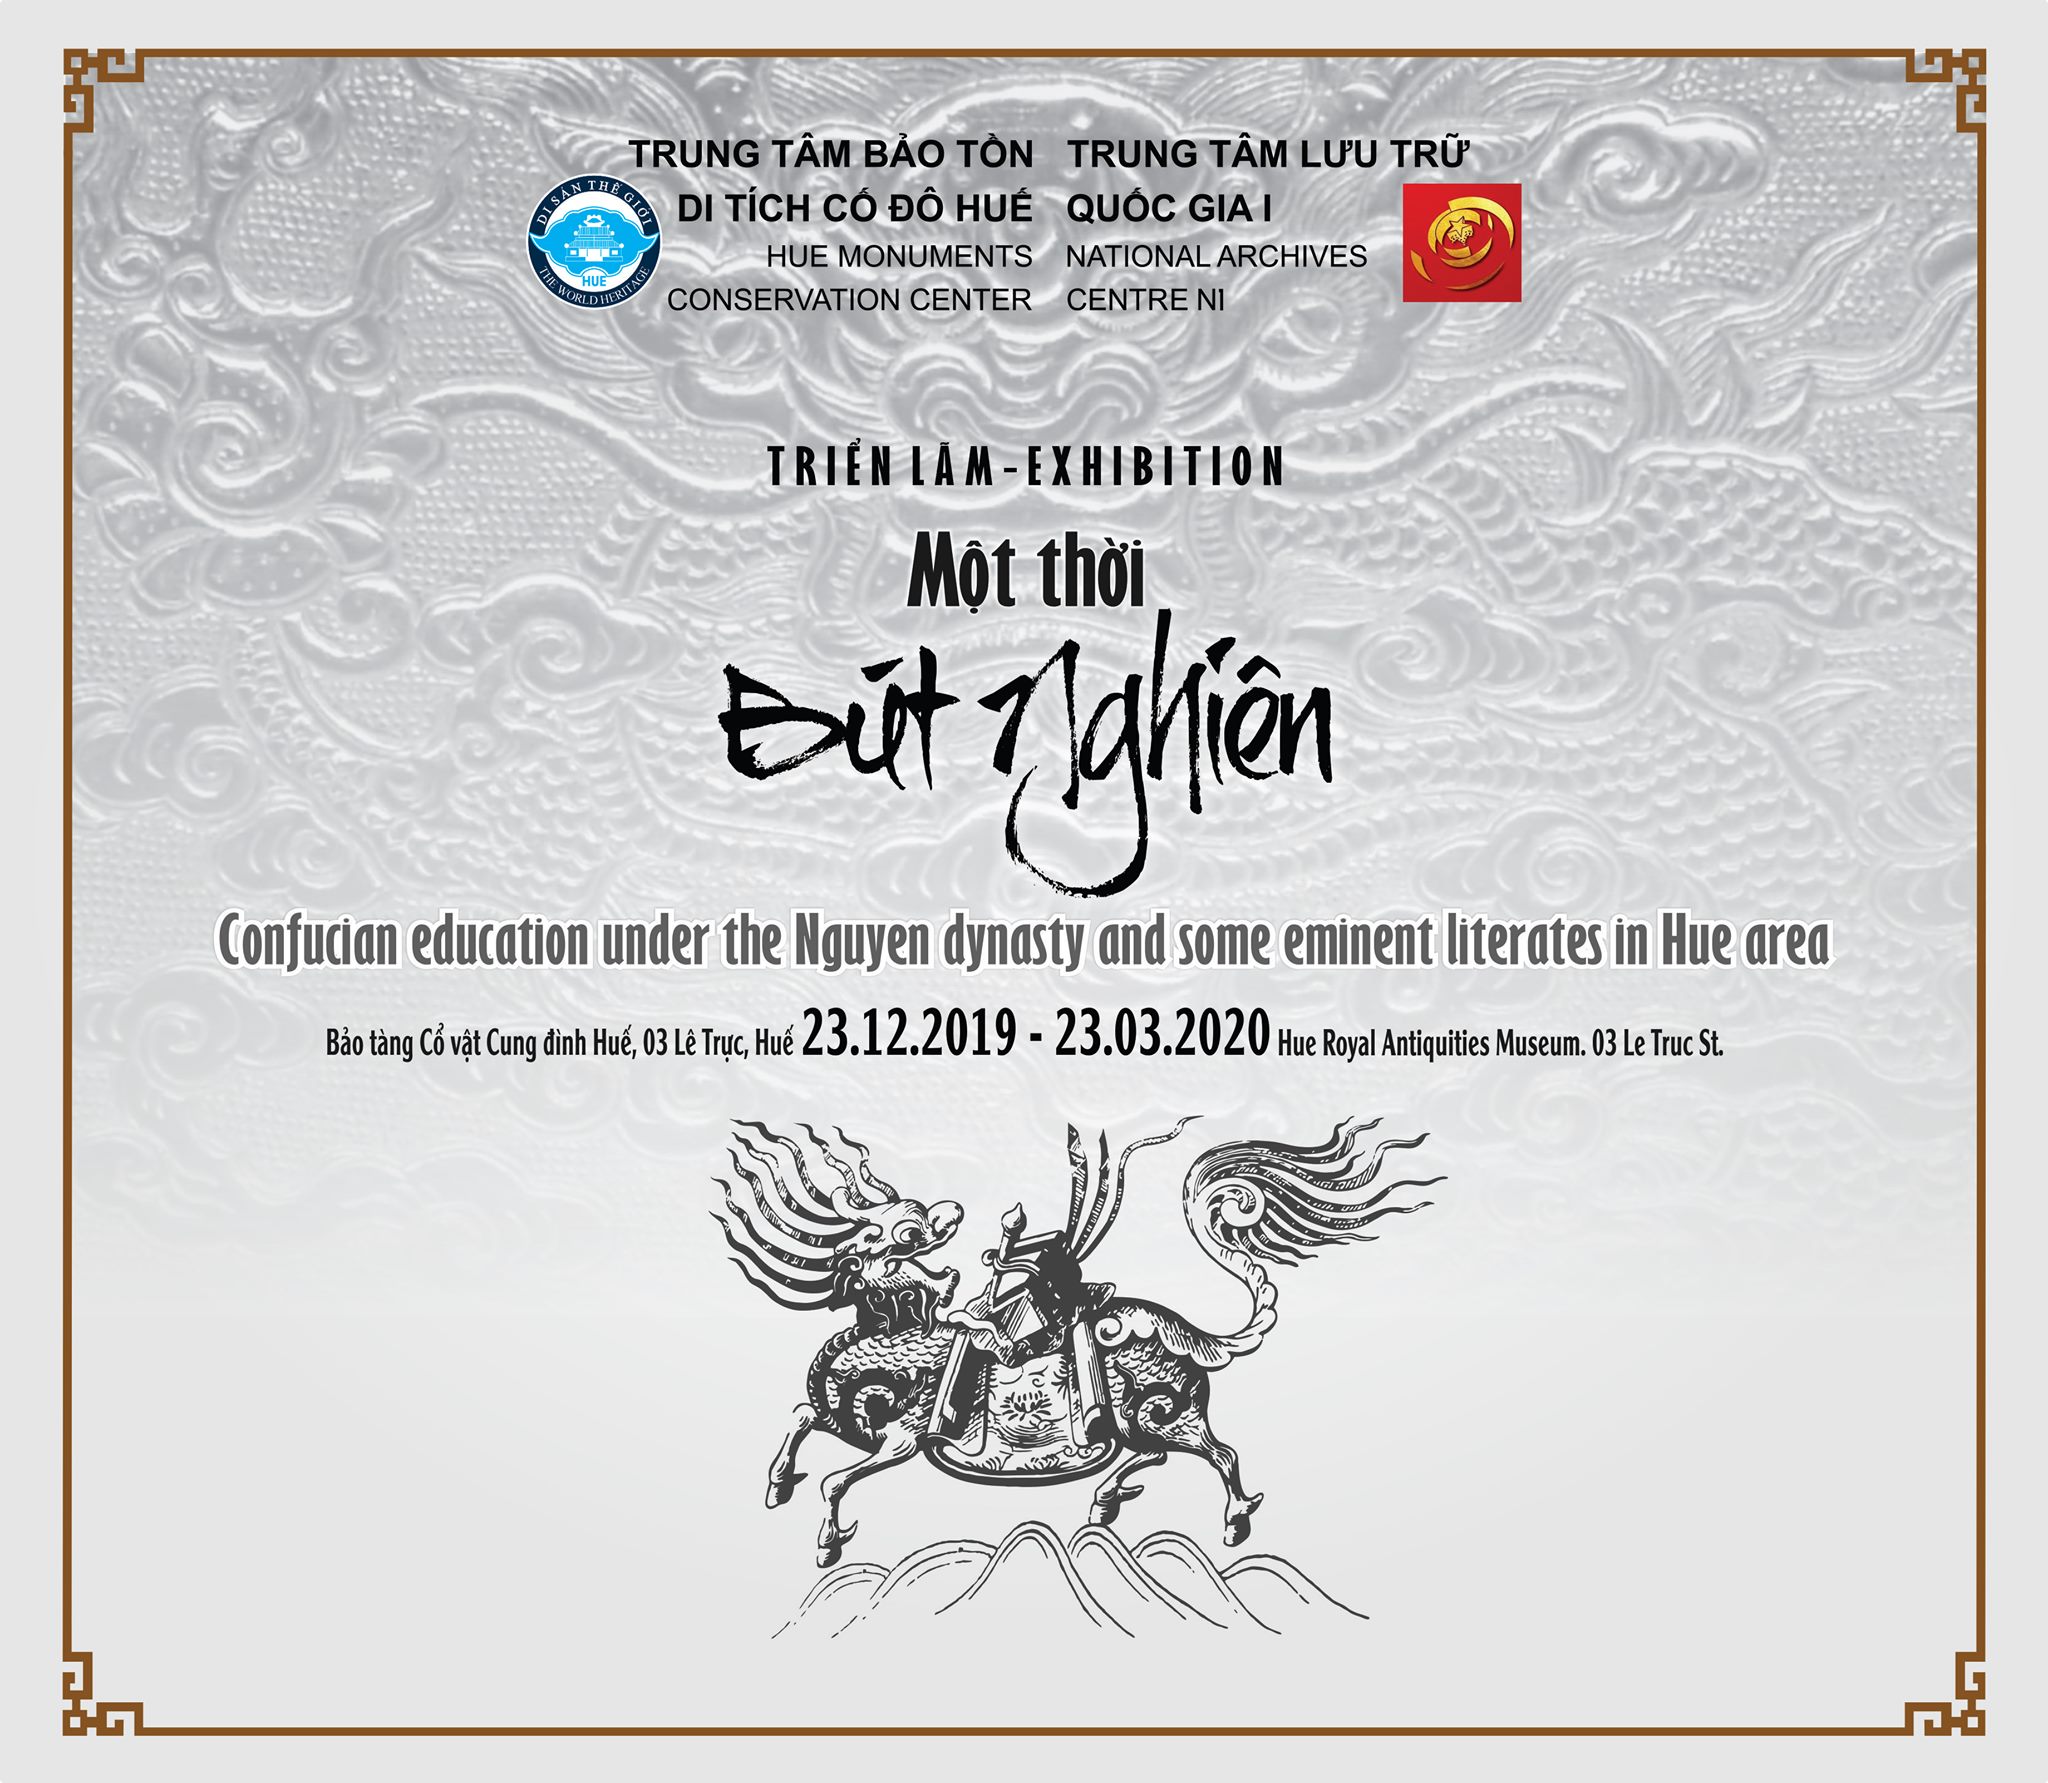 Exhibition "Confucian education under the Nguyen dynasty and some eminent literates in Hue area"